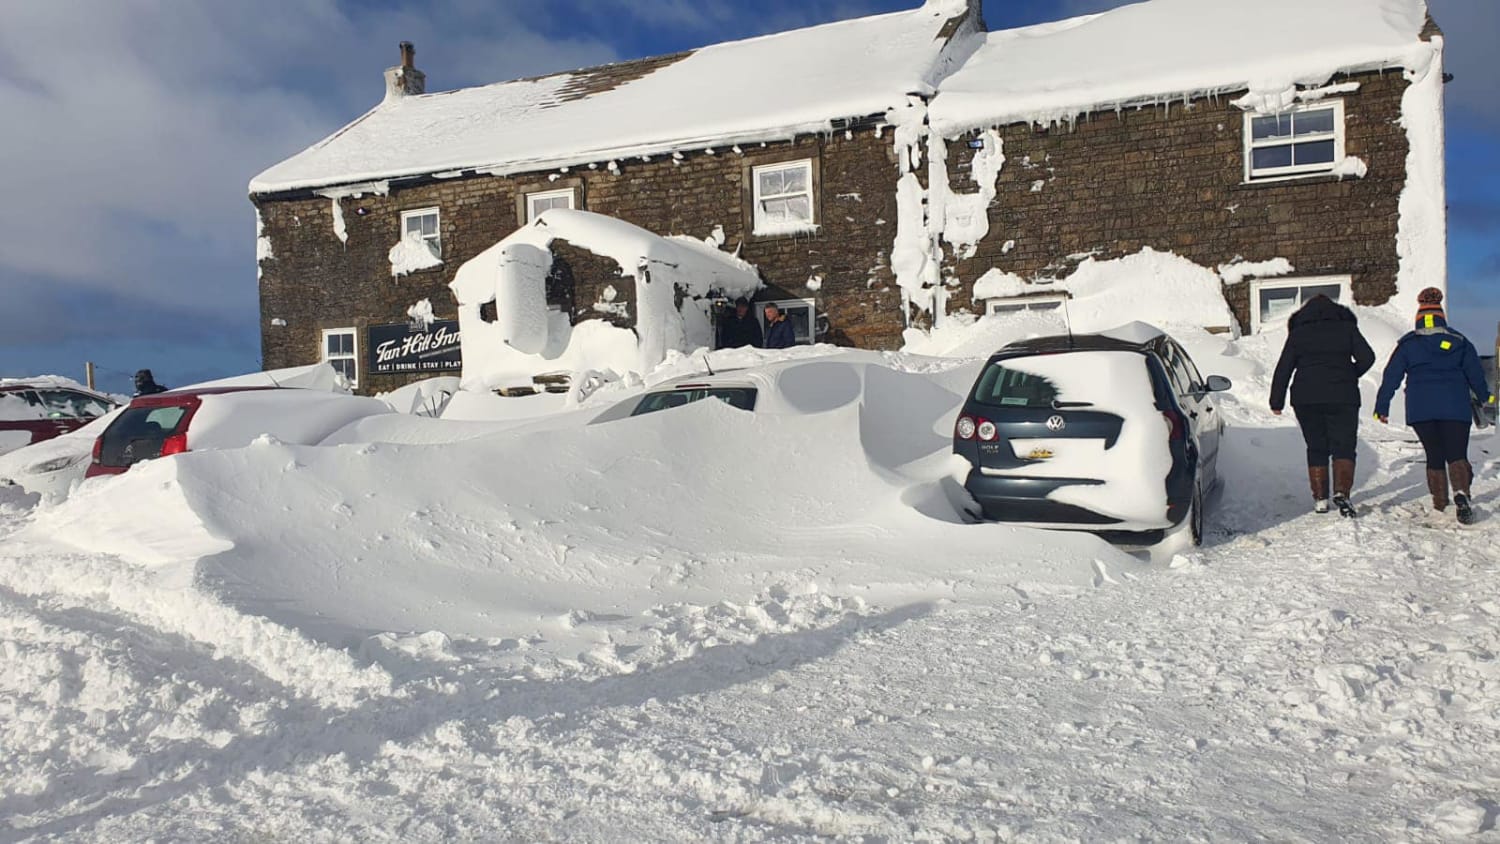 ‘Wonderwall’ of snow traps drinkers, and Oasis tribute band, in remote U.K. pub